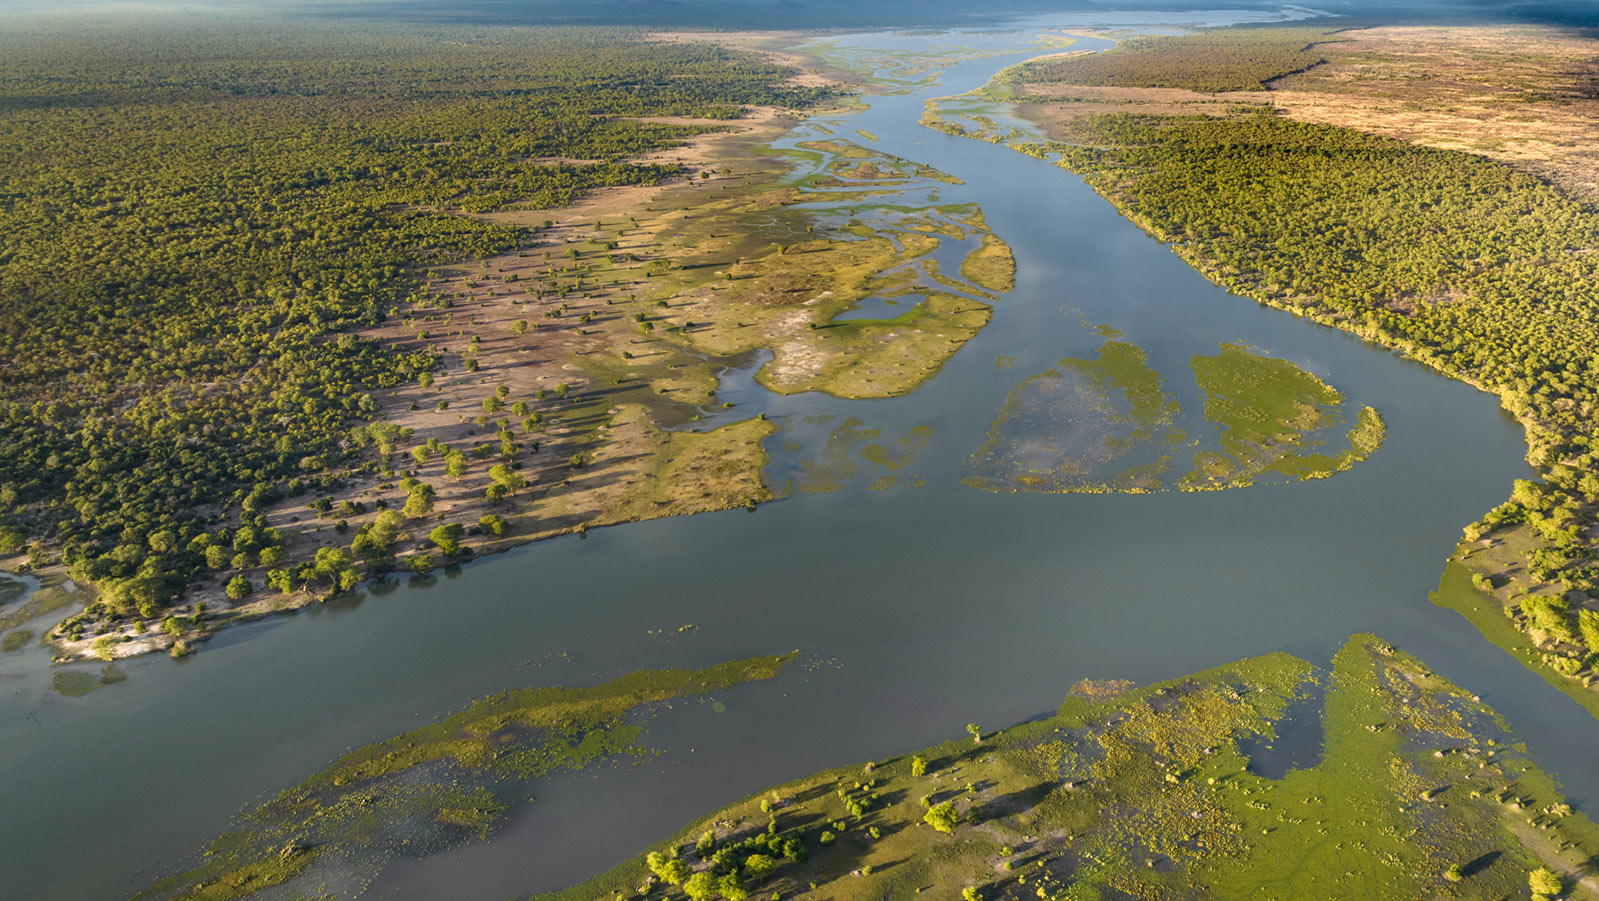 Aerial View of the Shire River